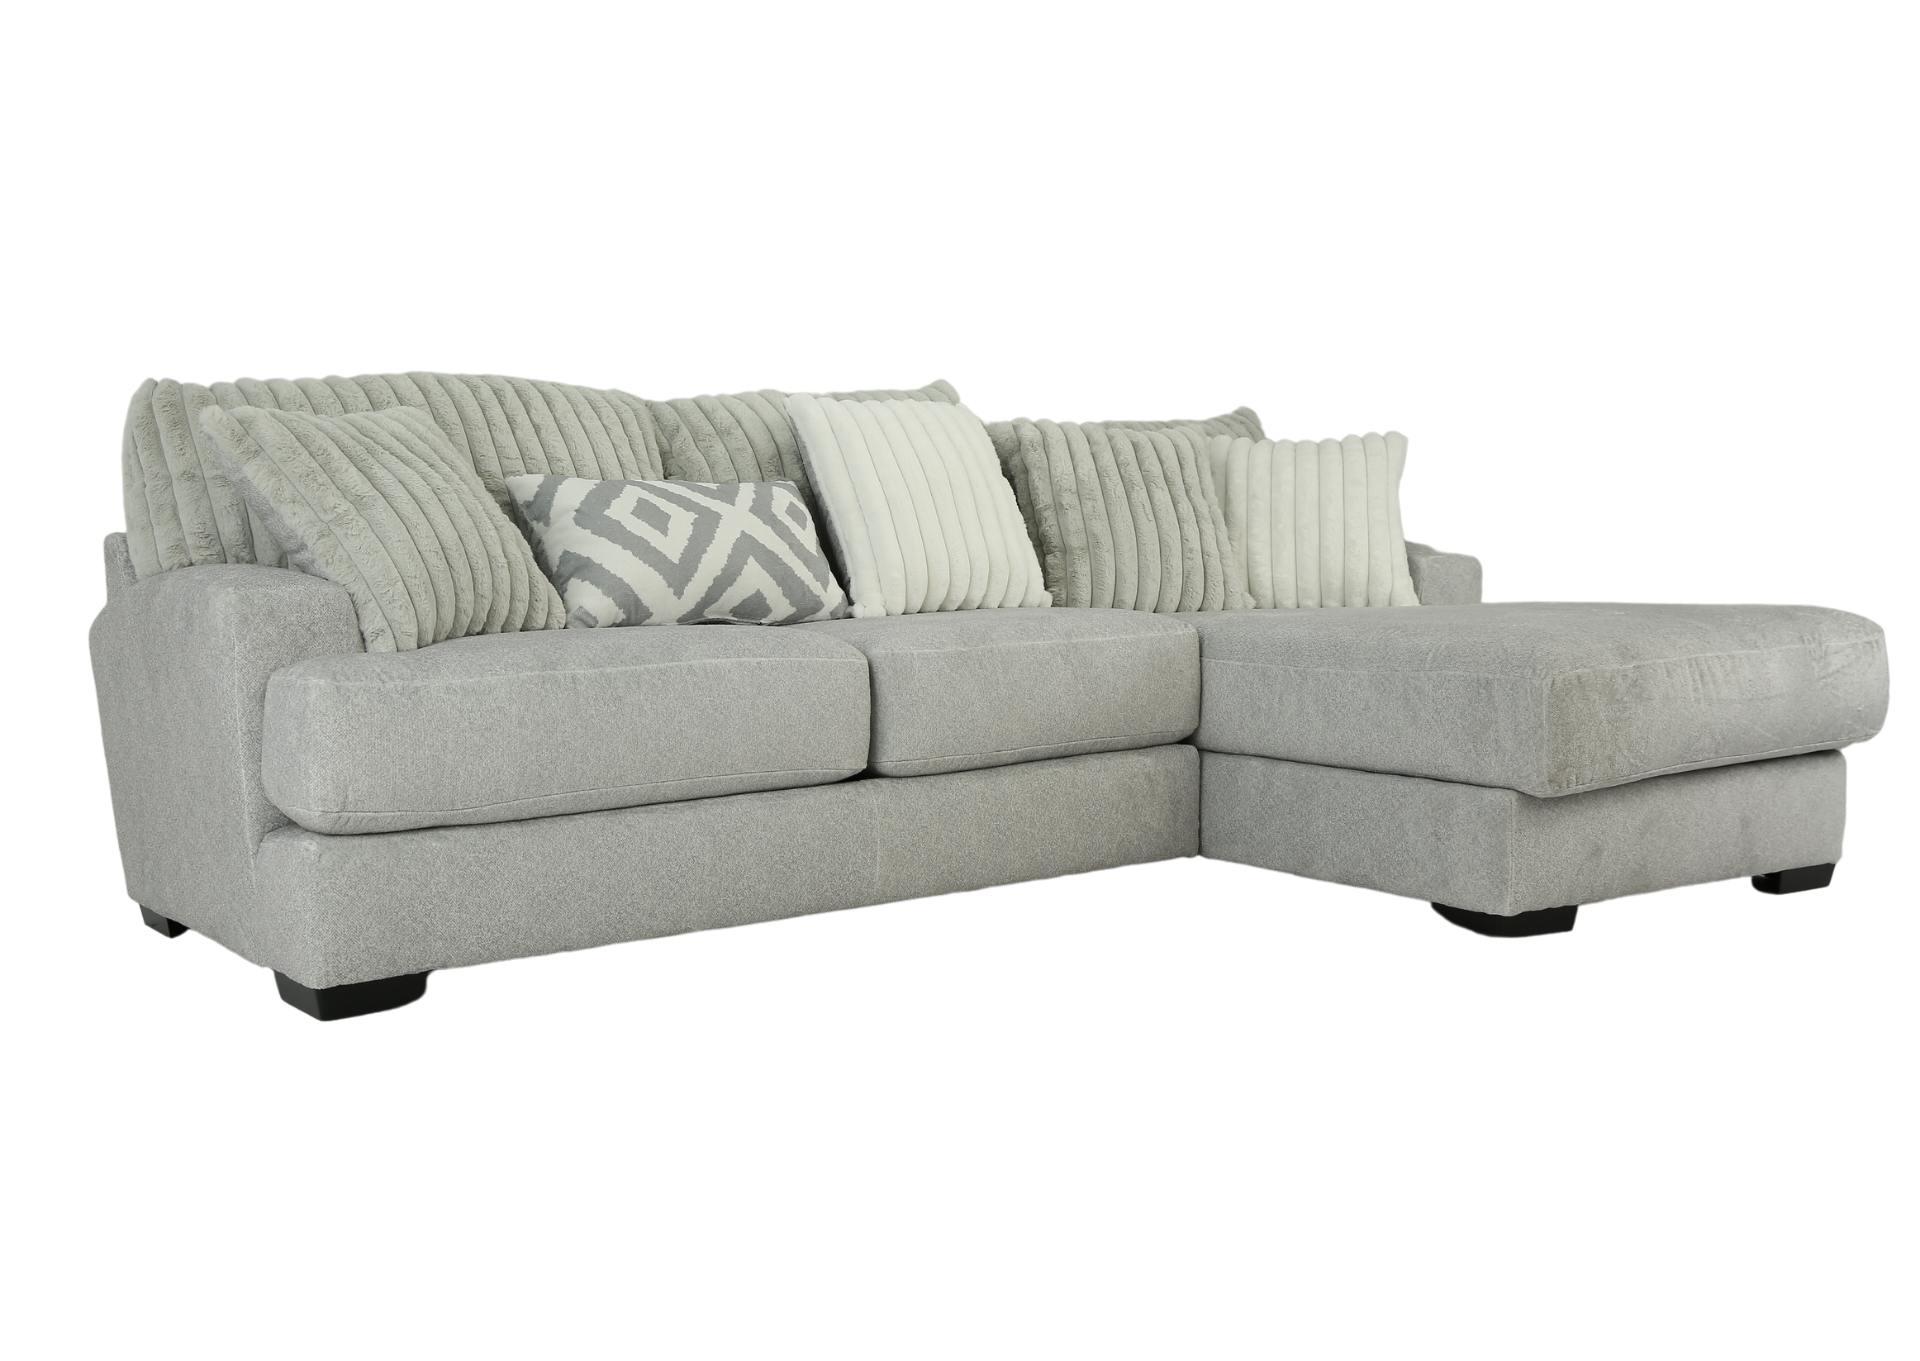 MONDO SILVER 2PC SECTIONAL,ALBANY INDUSTRIES, INC.